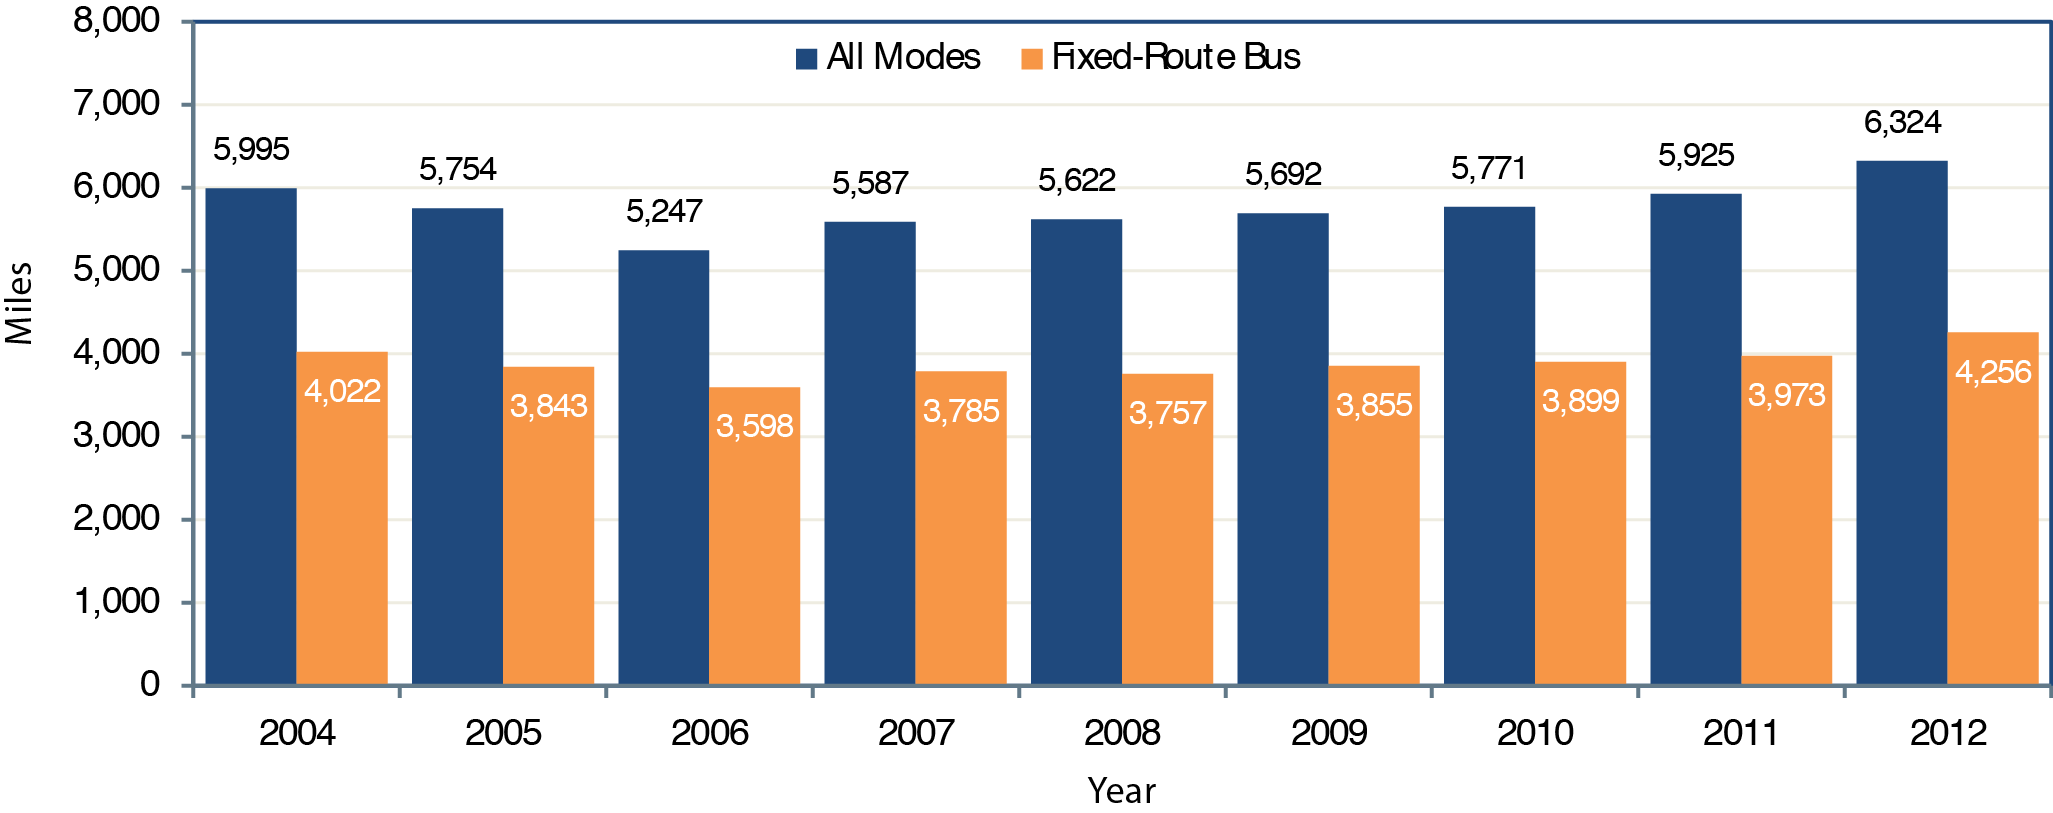 Bar chart plots values in miles for the period 2004 through 2012 for All Modes and Fixed Route Bus. For All Modes, from an initial value of 5,995 miles in the year 2004, the trend is downward to a value of 5,247 miles in the year 2006, then gradual continues to trend upward to end at a value of 6,324 miles in the year 2012. For Fixed Route Bus, from an initial value of 4,022 miles in the year 2004, the trend is downward to a value of 3,598 miles in the year 2006, upward to 3,785 miles in 2007, slightly down to 3,757 in 2008, and then gradually trends upward to end at a value of 4,256 miles in the year 2012. Source: National Transit Database. 